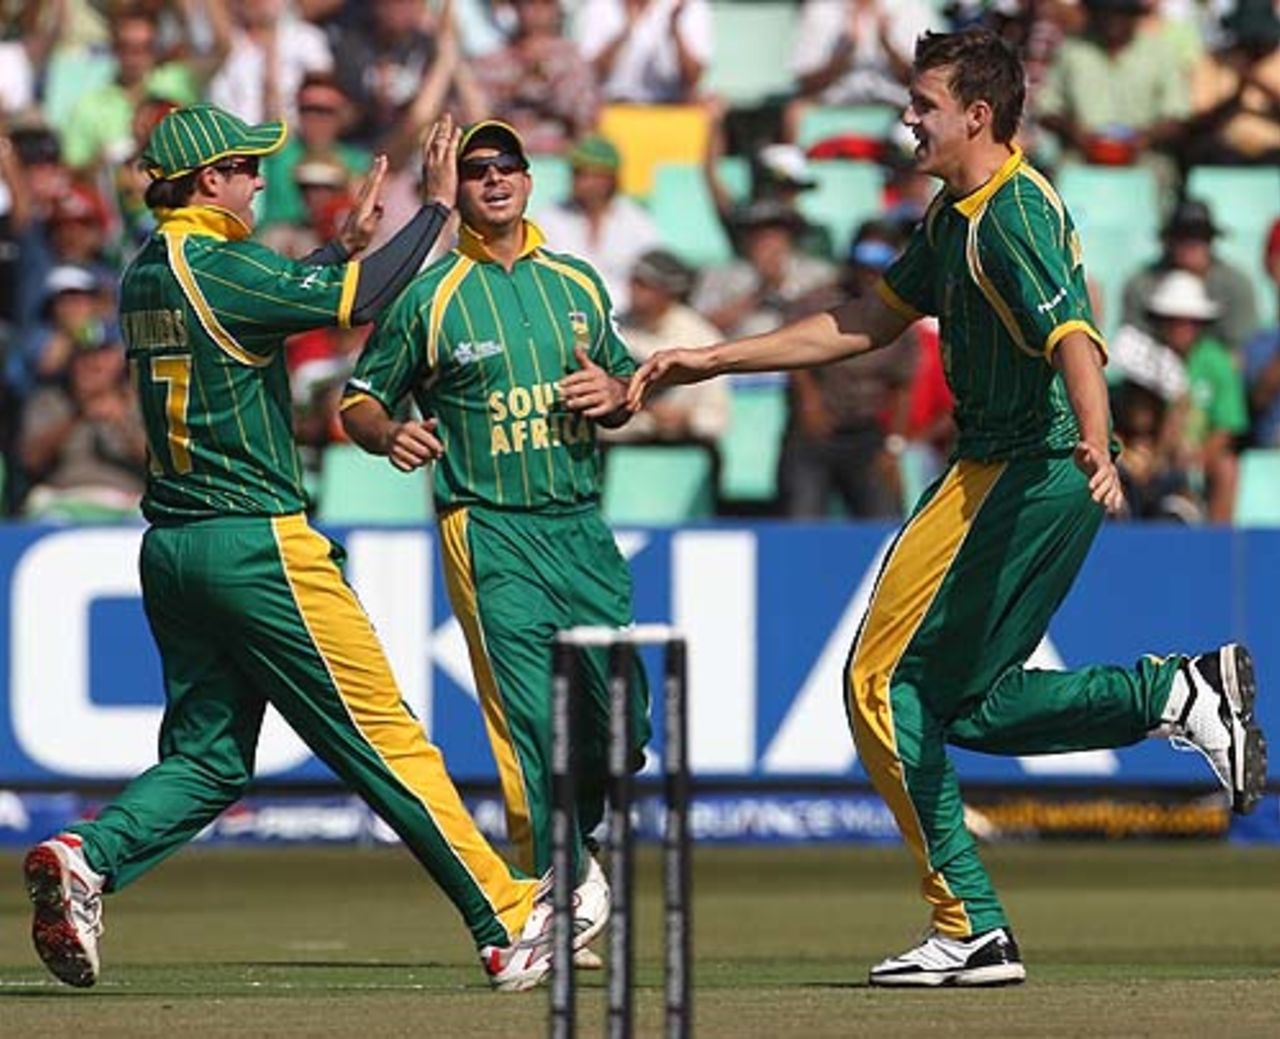 The South African players celebrate after Morne Morkel dismissed Brendon McCullum, South Africa v New Zealand, Group E, ICC World Twenty20, Durban, September 19, 2007